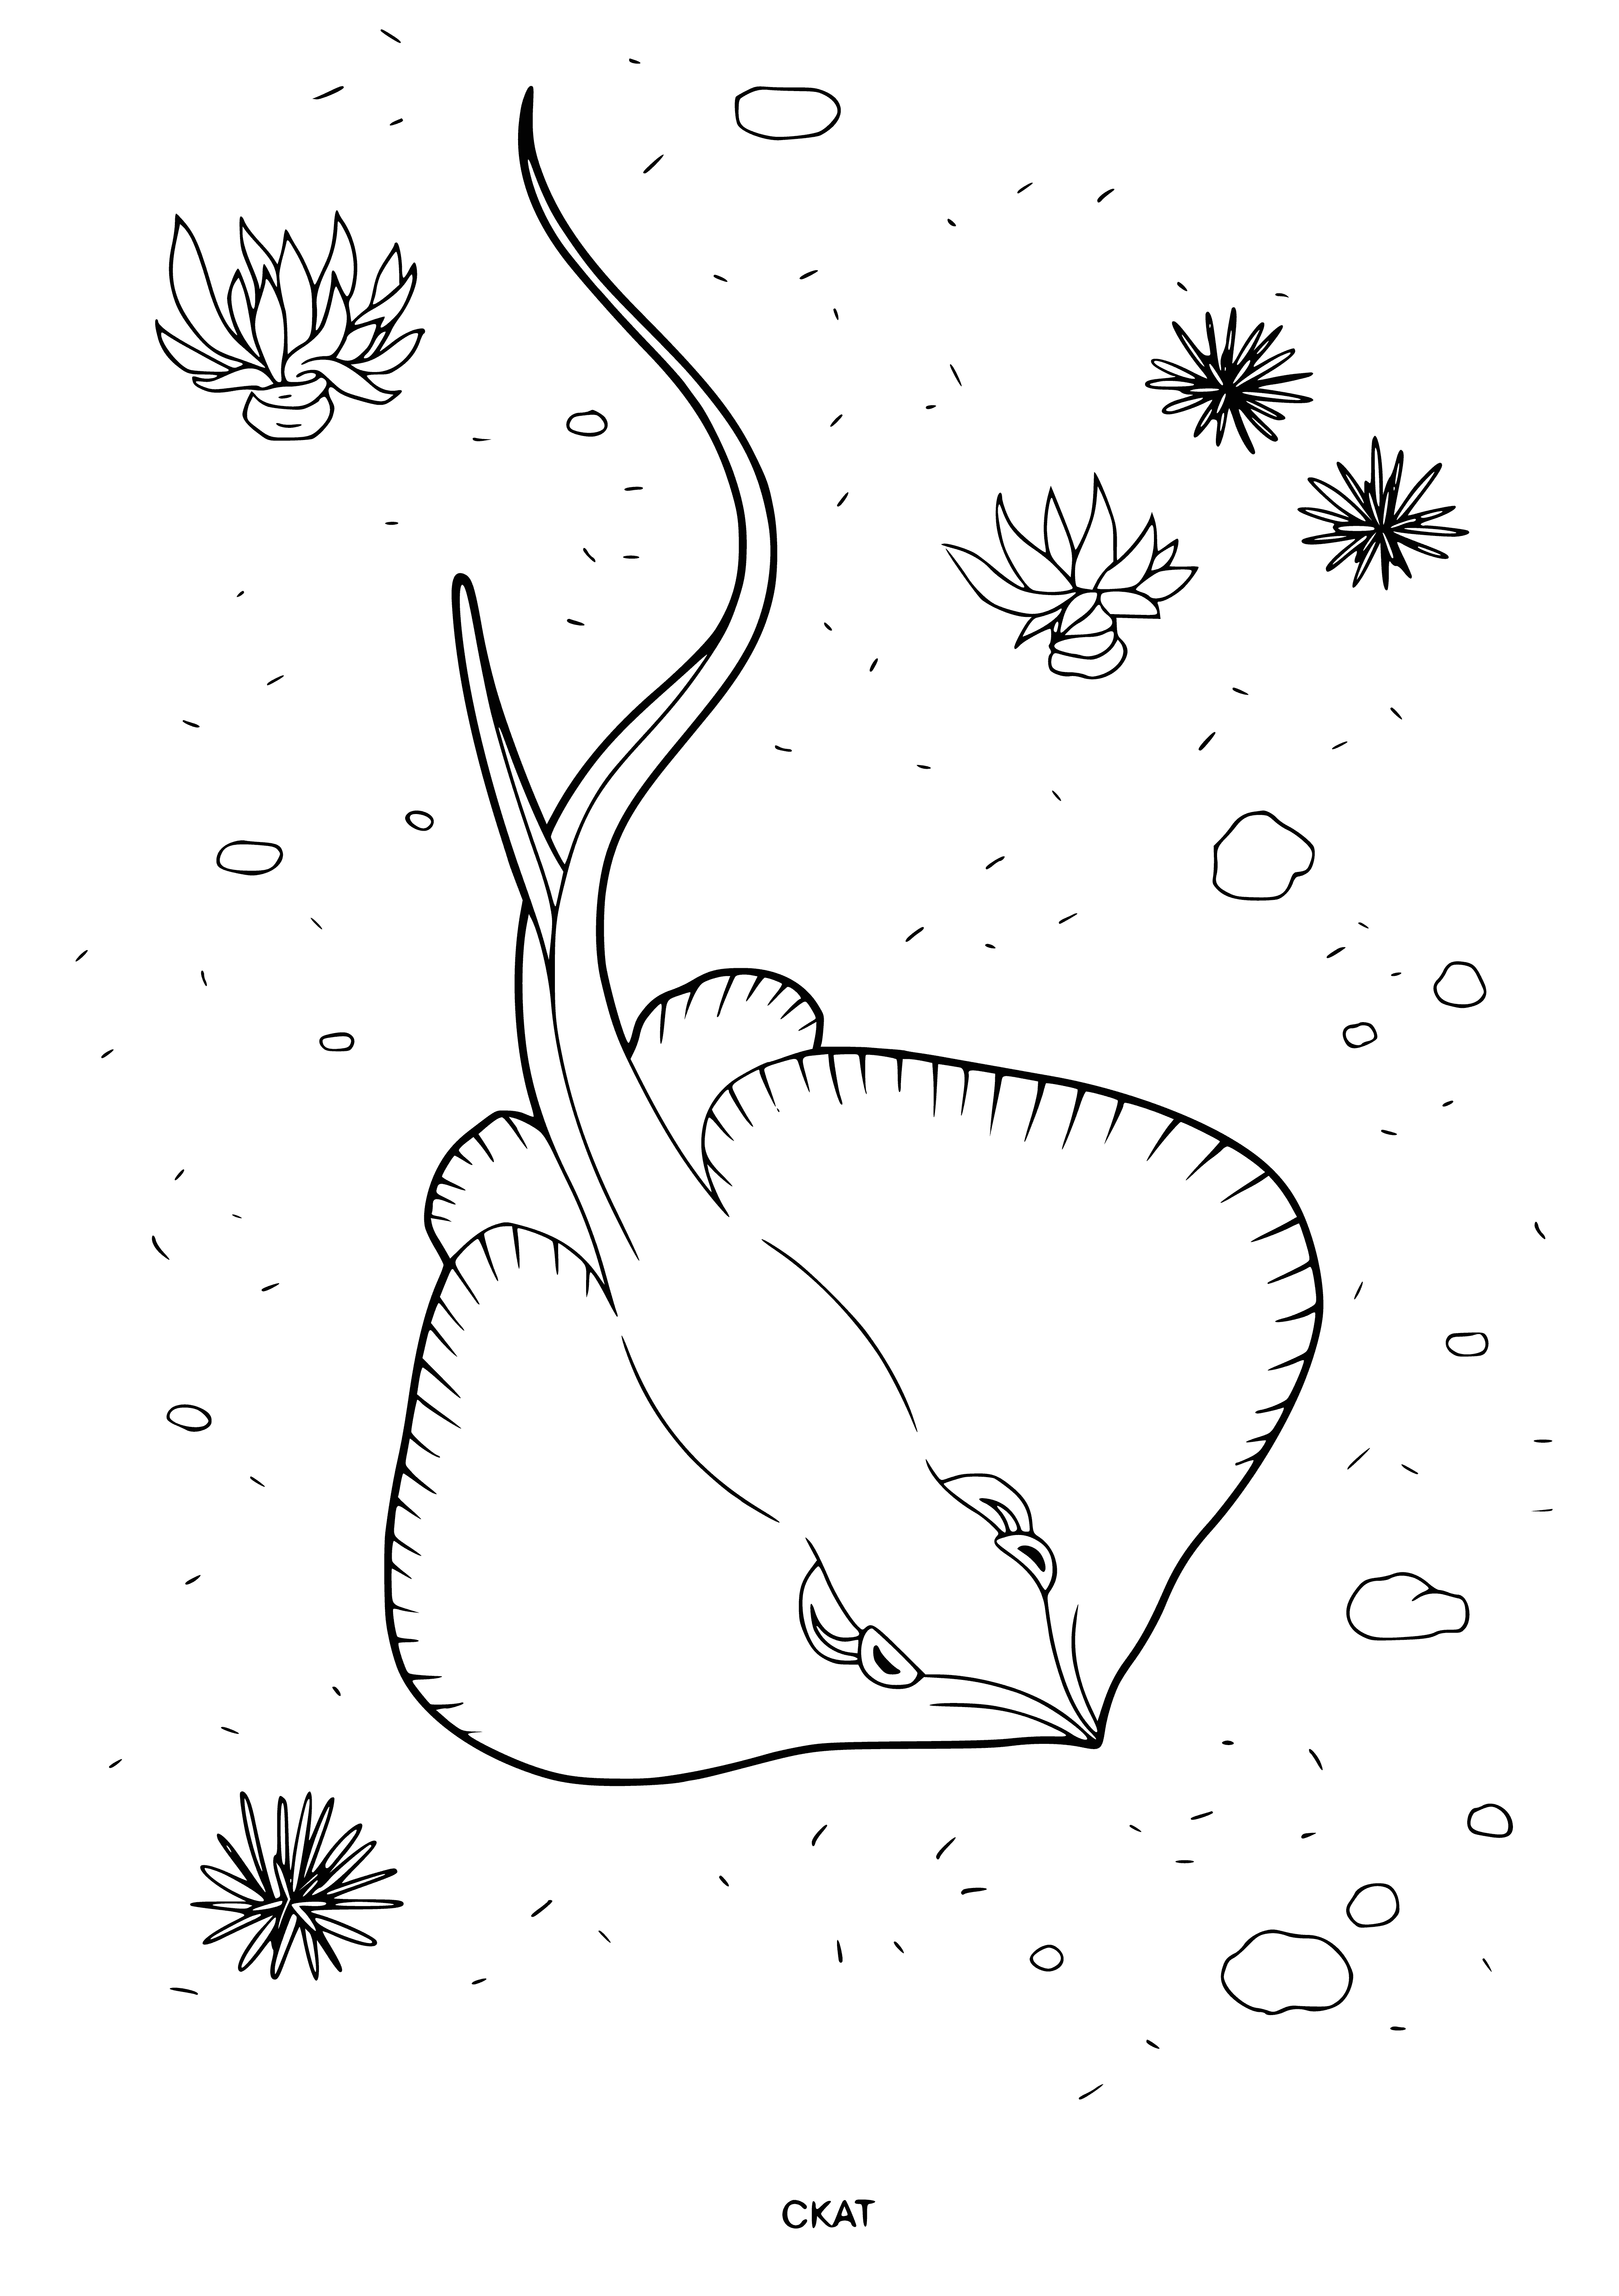 Scat coloring page